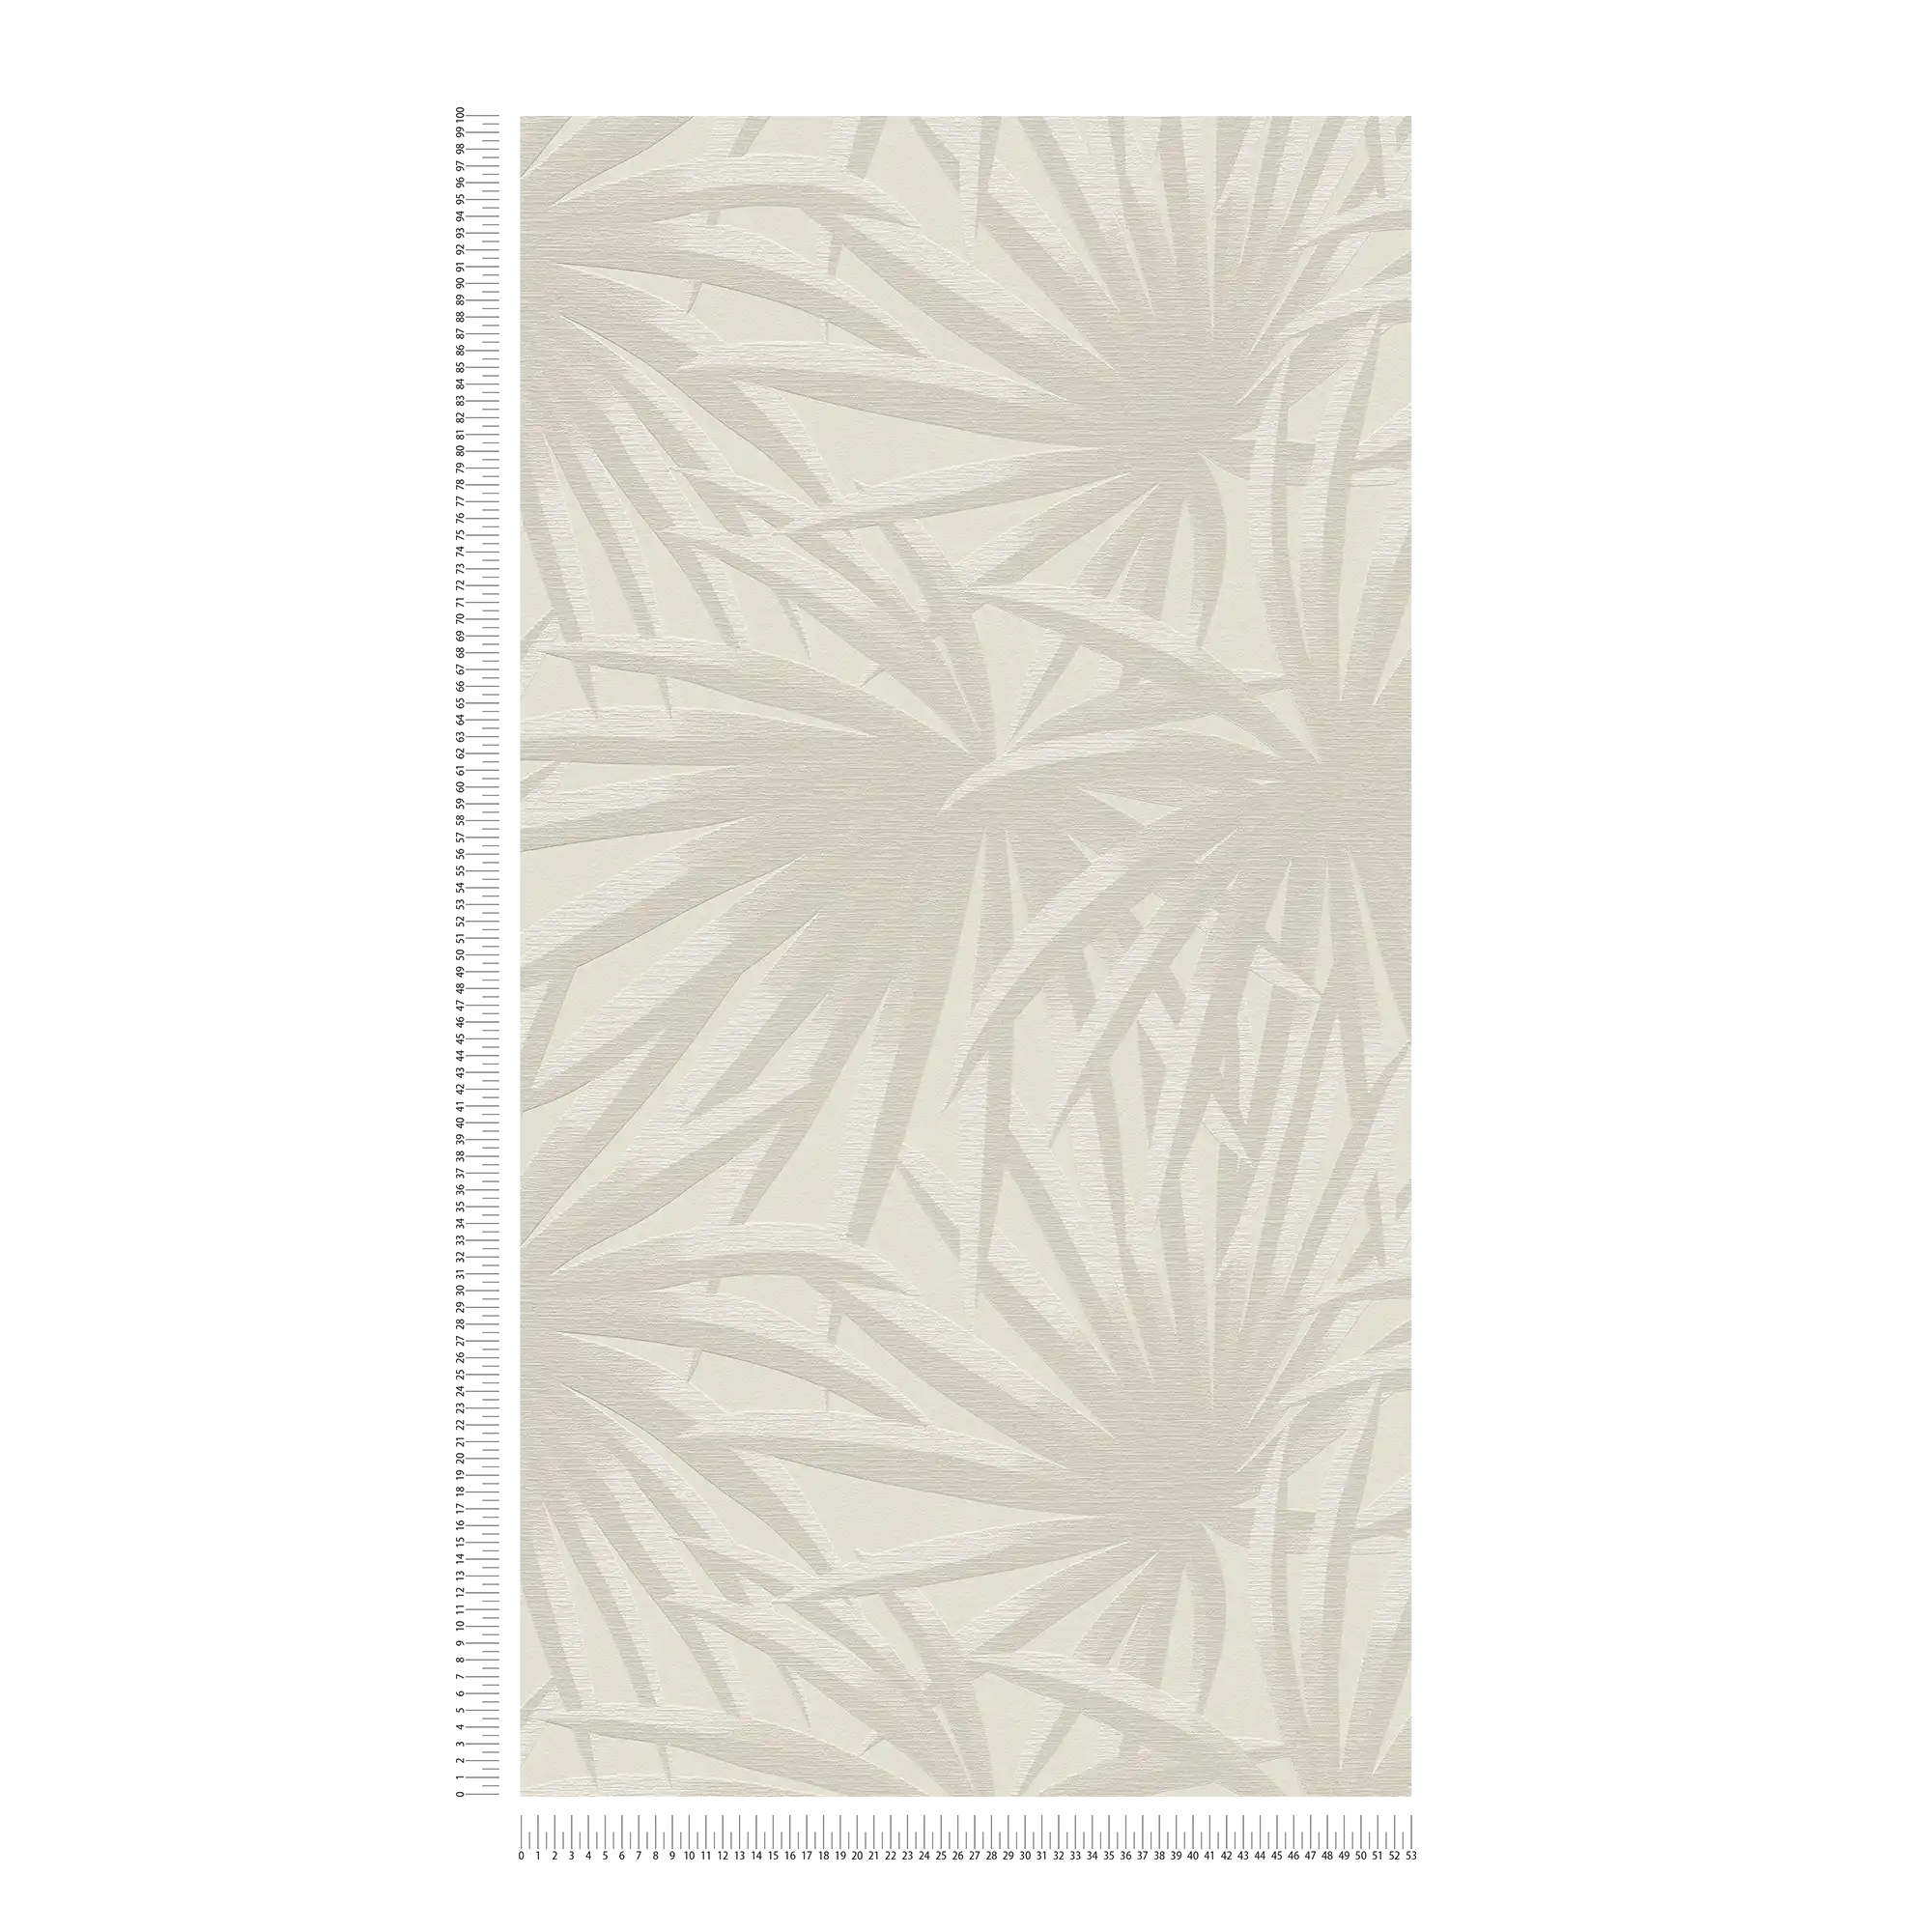             Non-woven wallpaper with palm leaf pattern in soft colours - cream, light grey
        